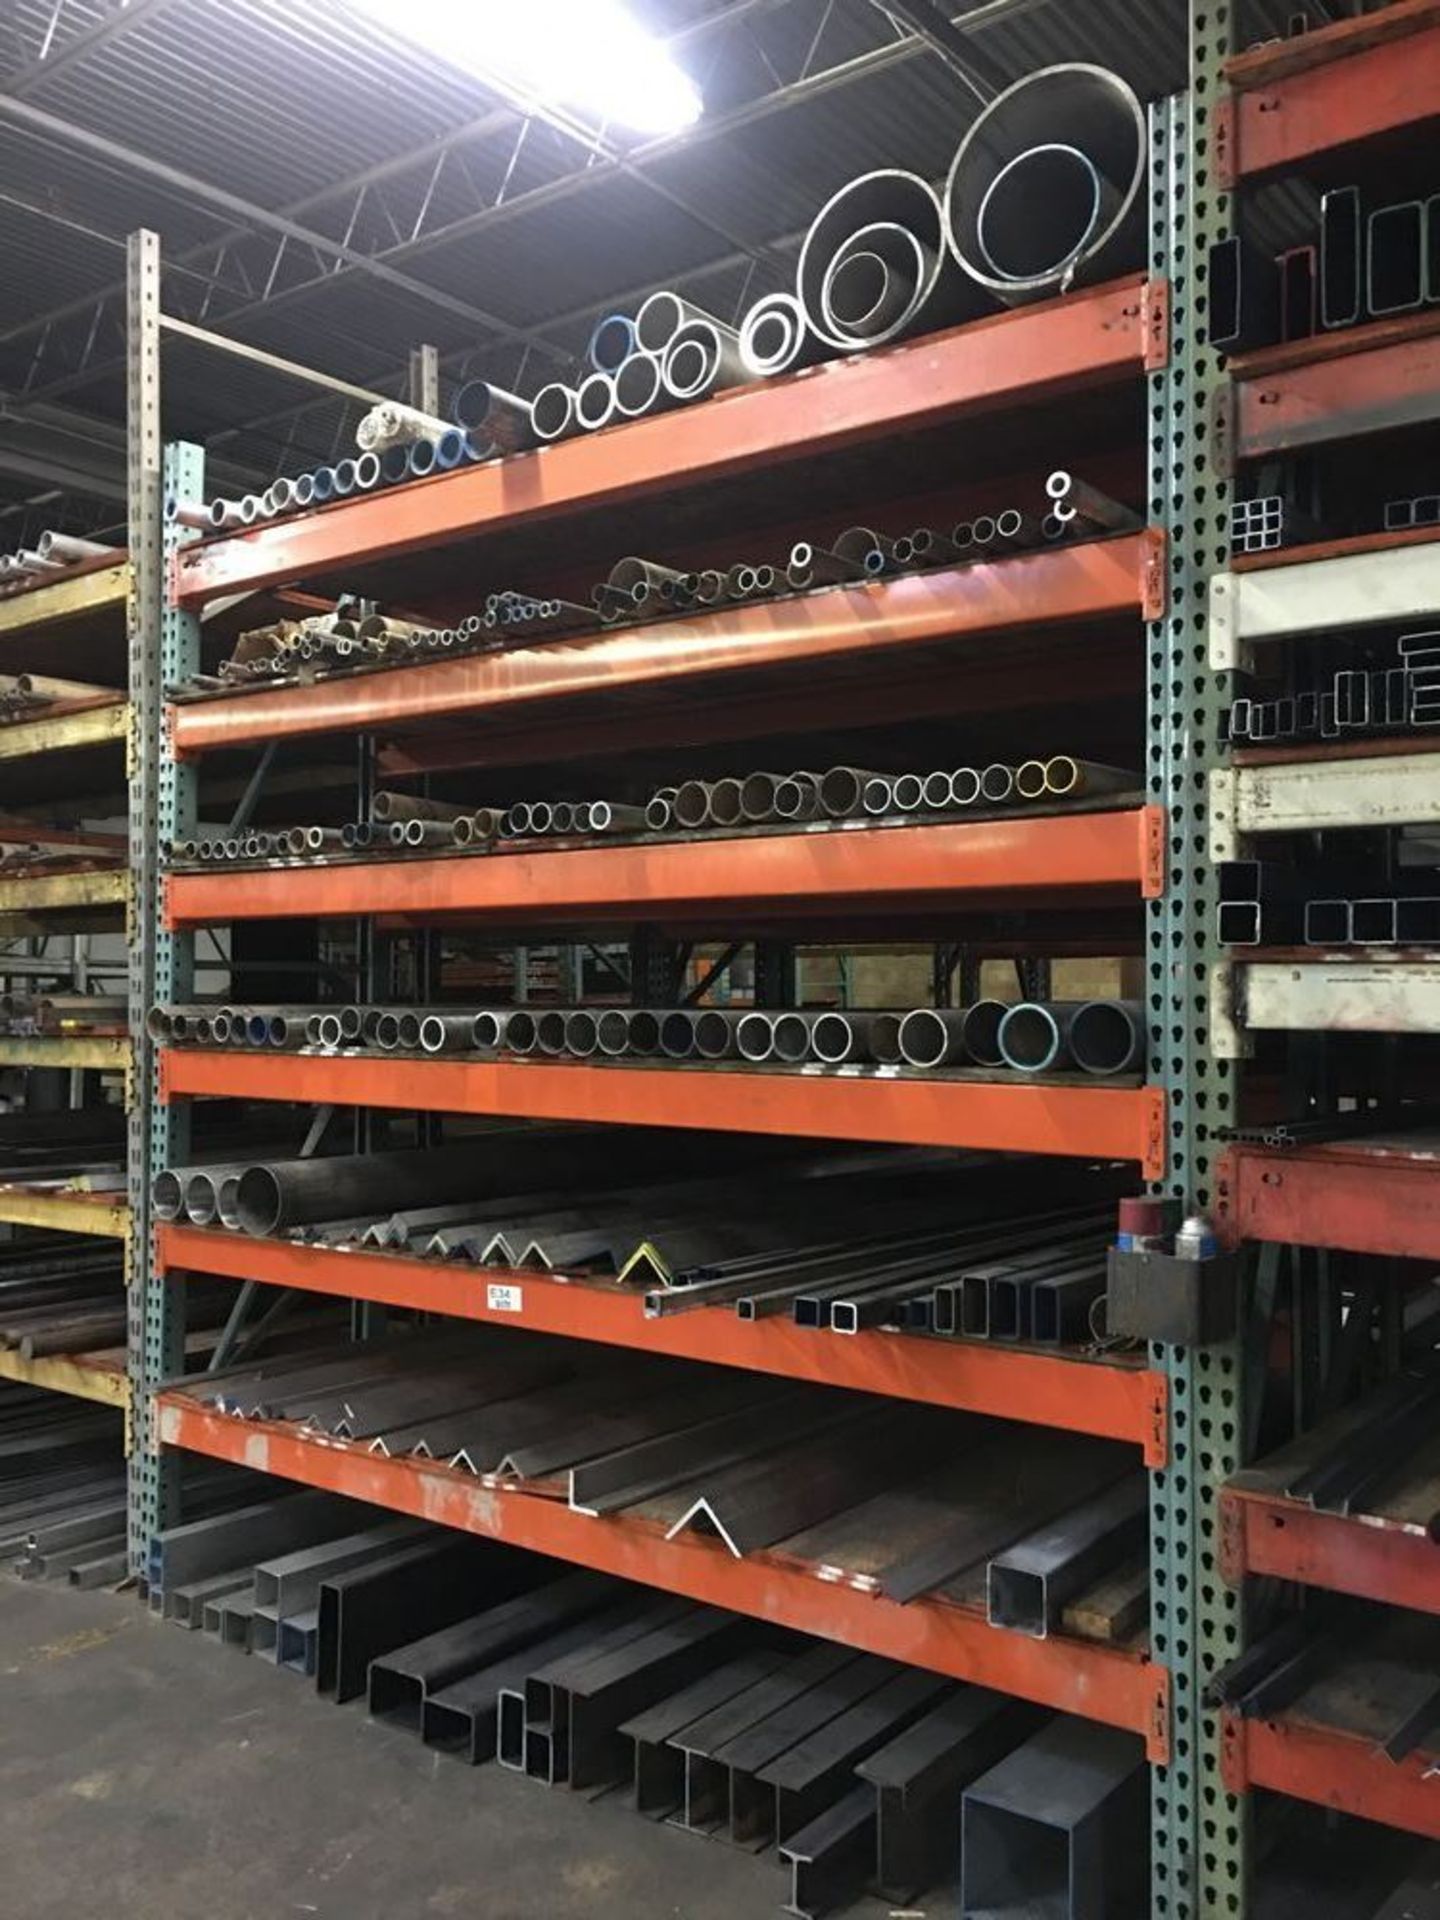 Pallet rack (no contents) 10' tall x 9' arms